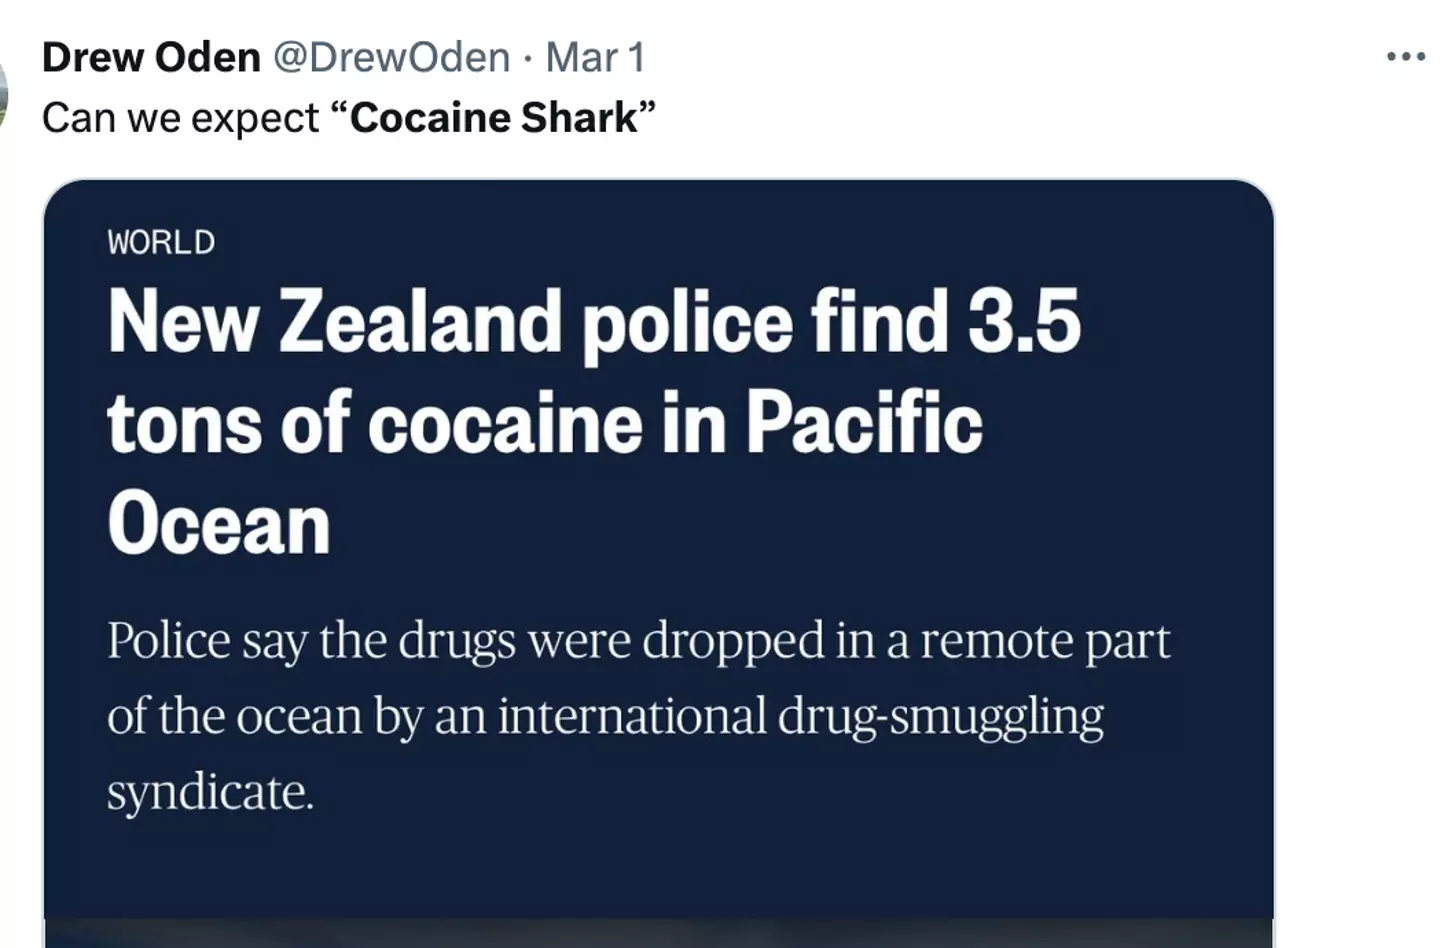 Internet users were quick to demand Cocaine Shark.